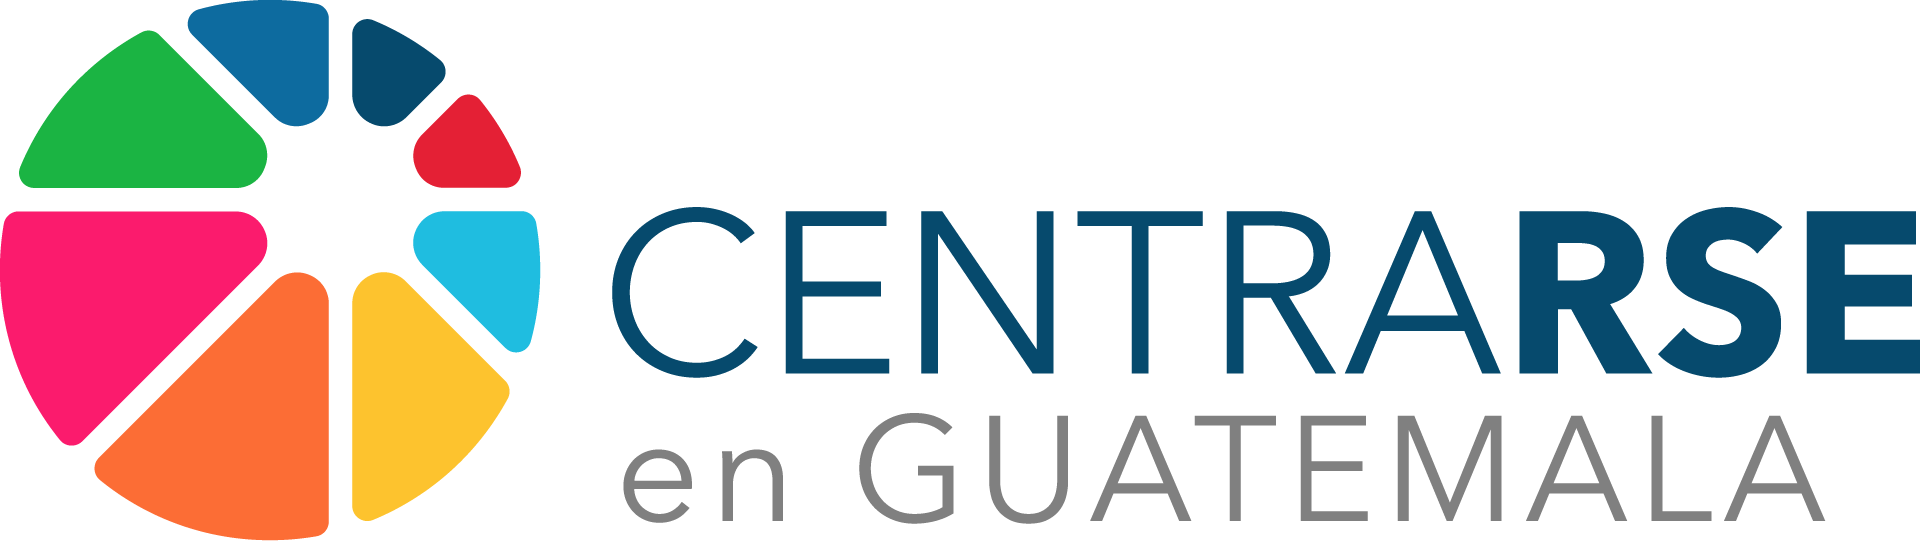 CentraRSE_Logo_Color (2).png